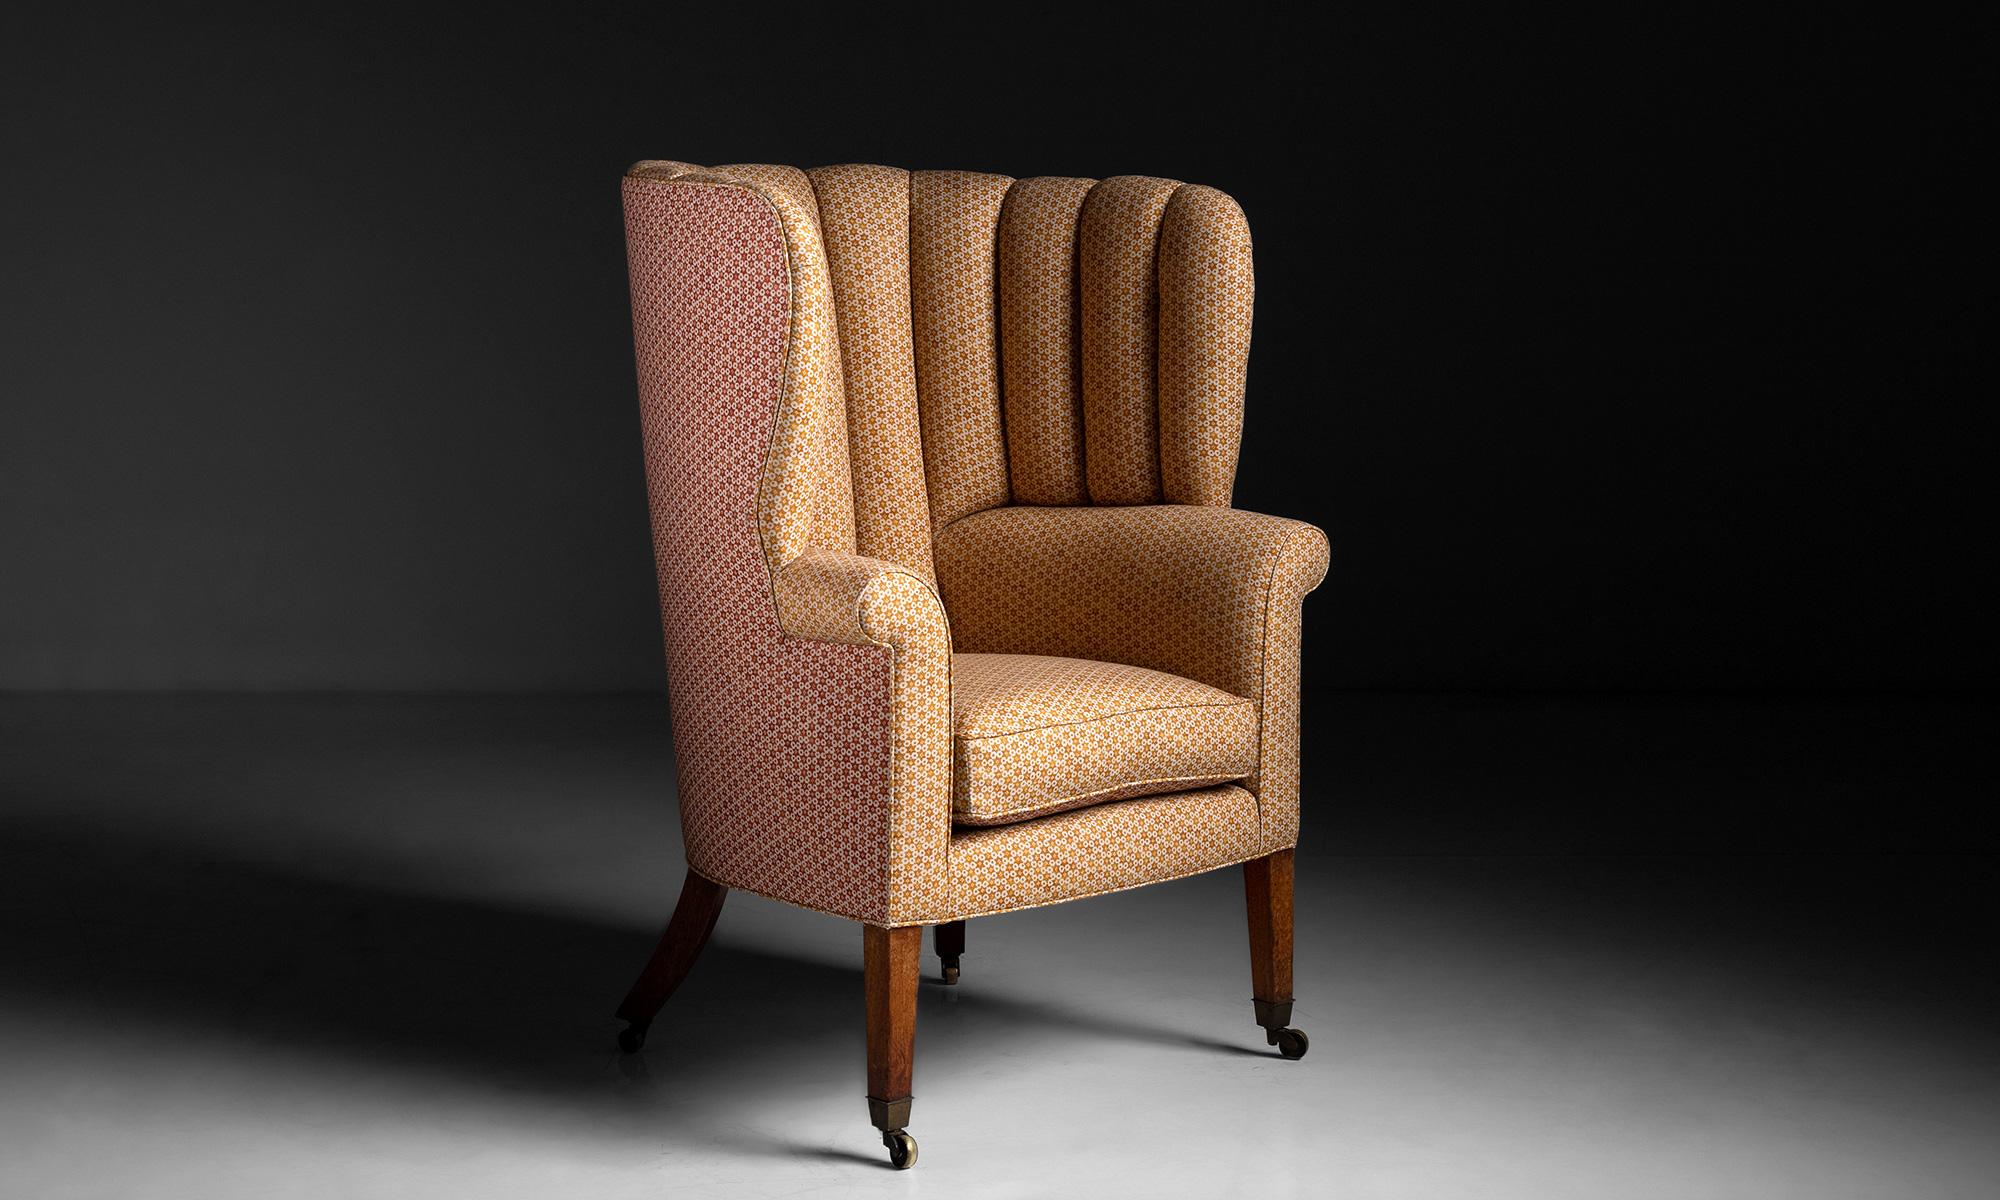 Barrel back chair in Patterned Linen by Zak + Fox

England circa 1810

Newly upholstered on antique frame with mahogany legs and original castors.

Measures: 31.5” L x 24.5” D x 45.25” H x 20” seat.